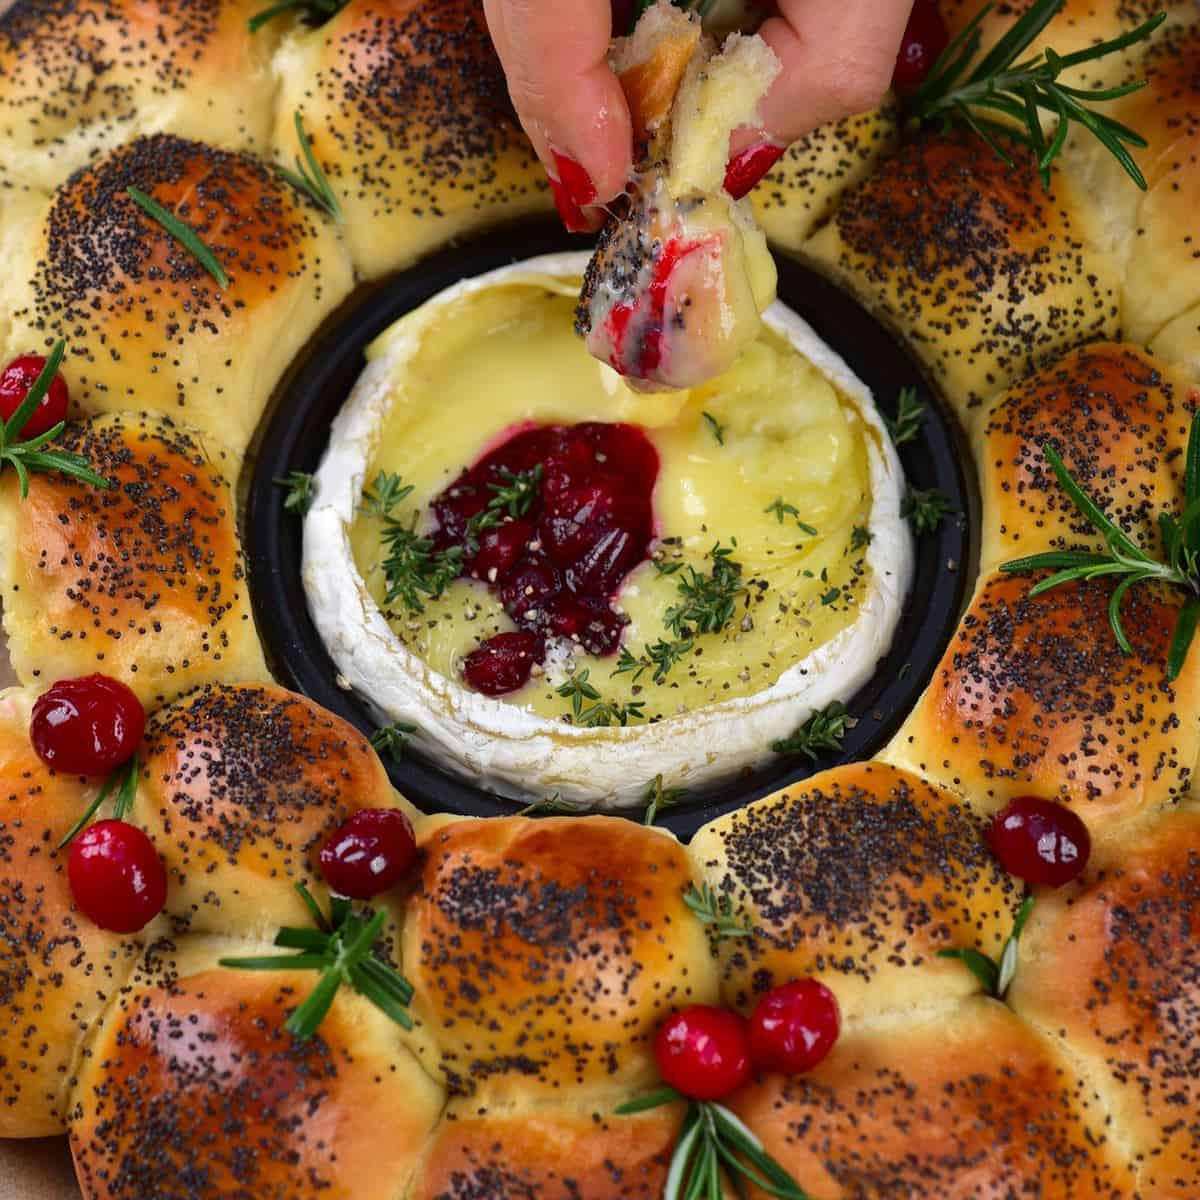 Bun wreath with camembert center topped with cranberries and rosemary